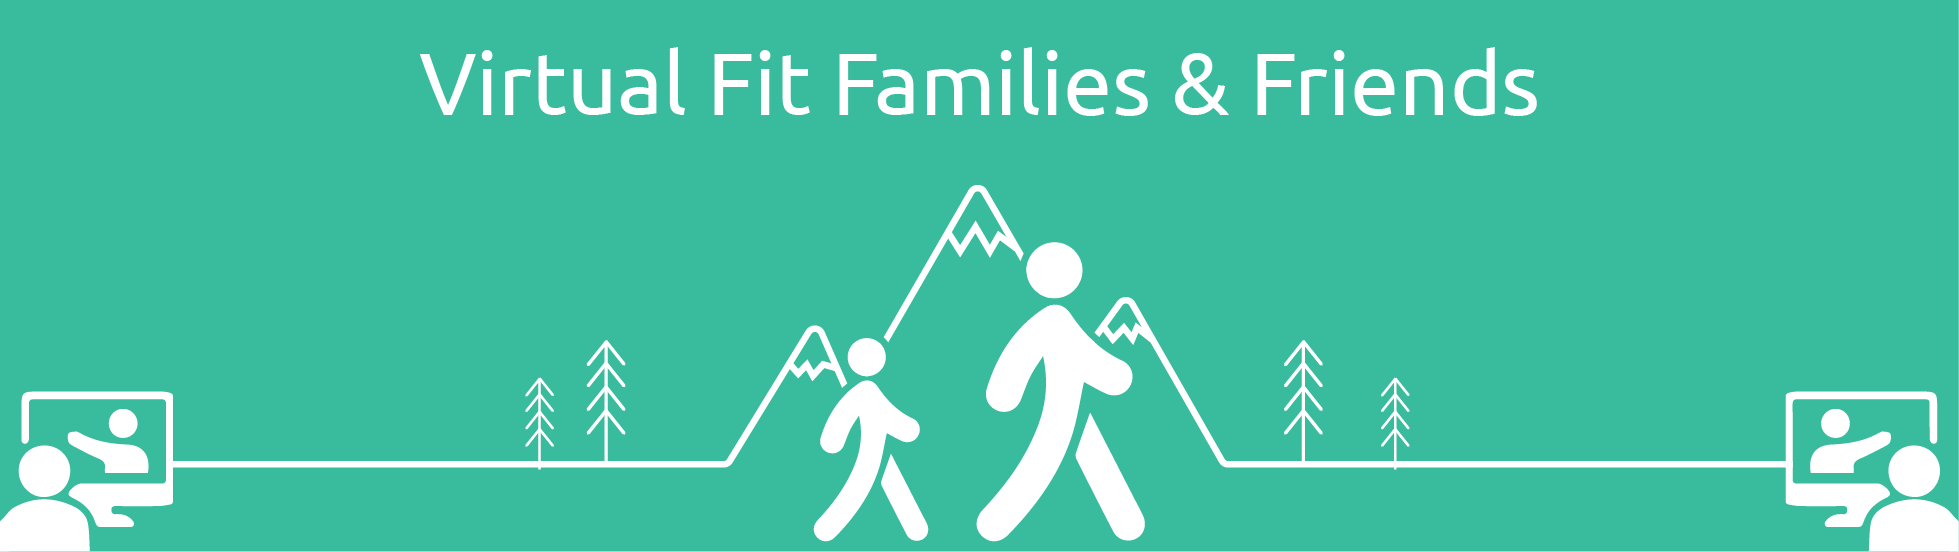 Virtual Fit Families and Friends banner